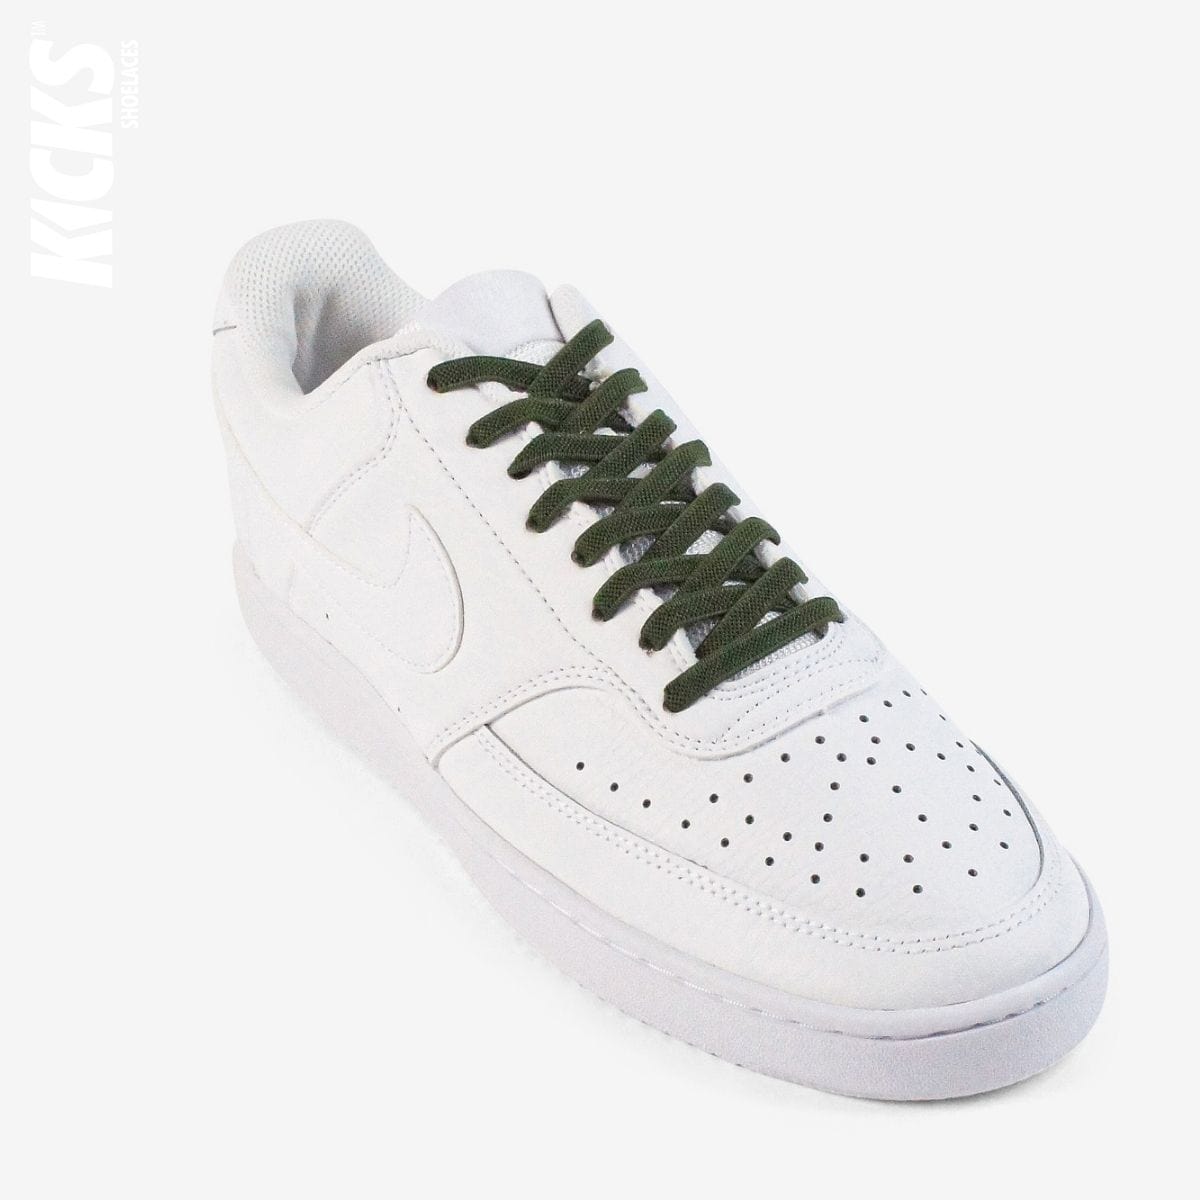 no-tie-shoelaces-with-army-green-laces-on-nike-white-sneakers-by-kicks-shoelaces